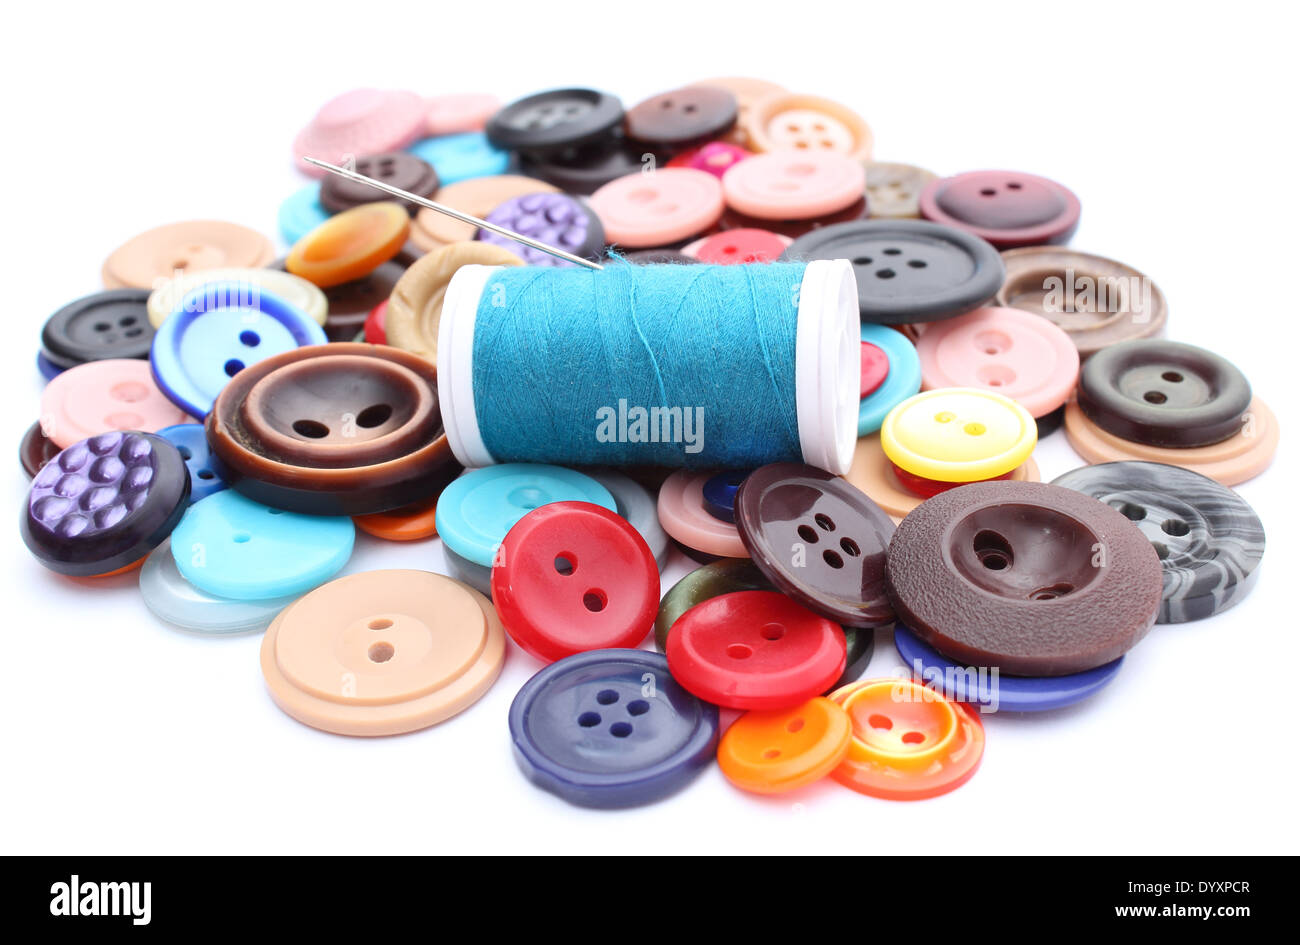 Materials Sewing Colored Fabric Thread Buttons Stock Photo 480074866